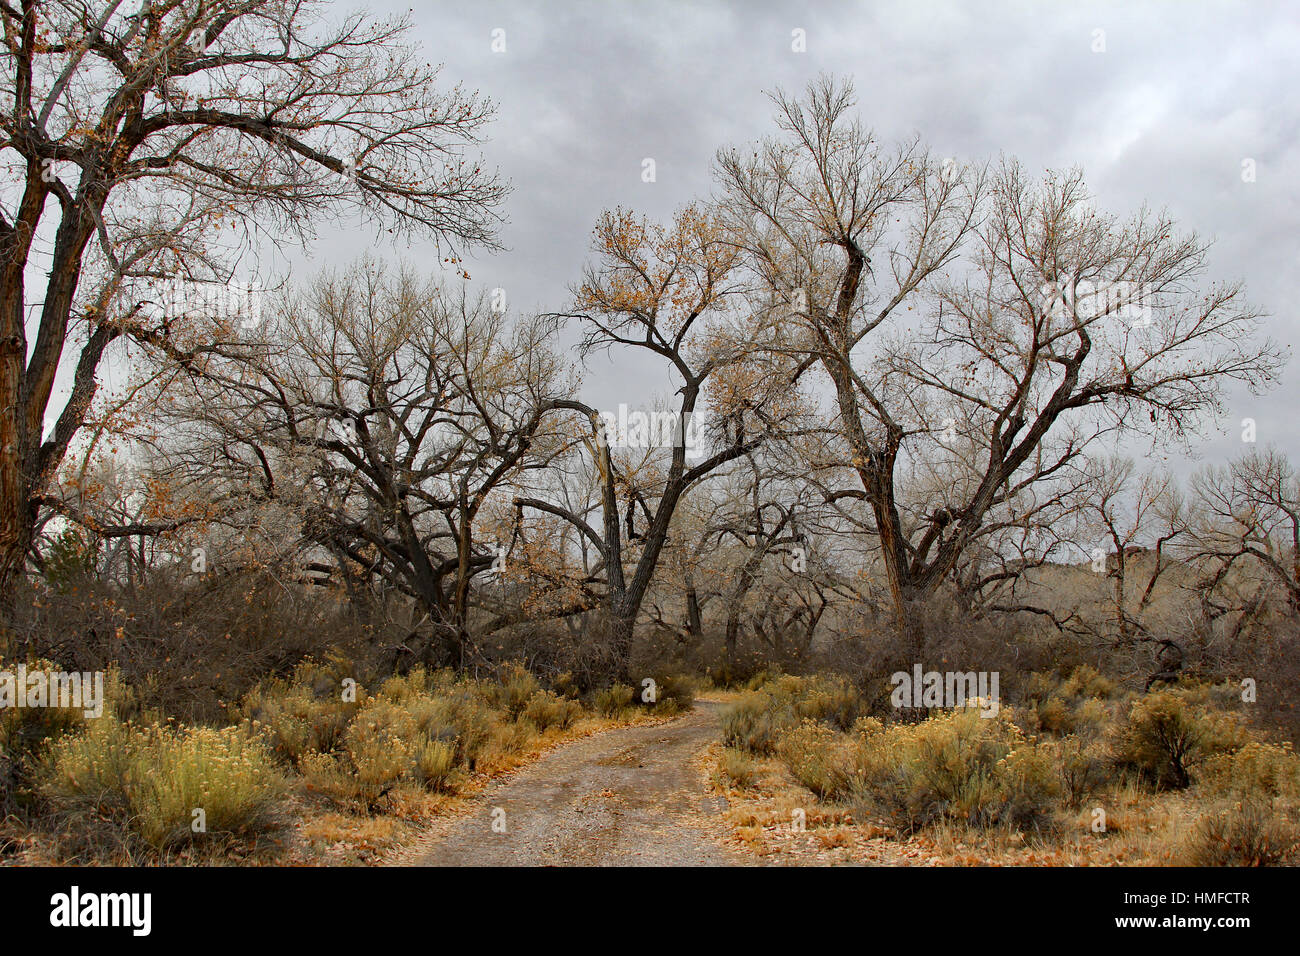 Cottonwood trees in winter along a hiking path in Ojo Caliente, New Mexico Stock Photo